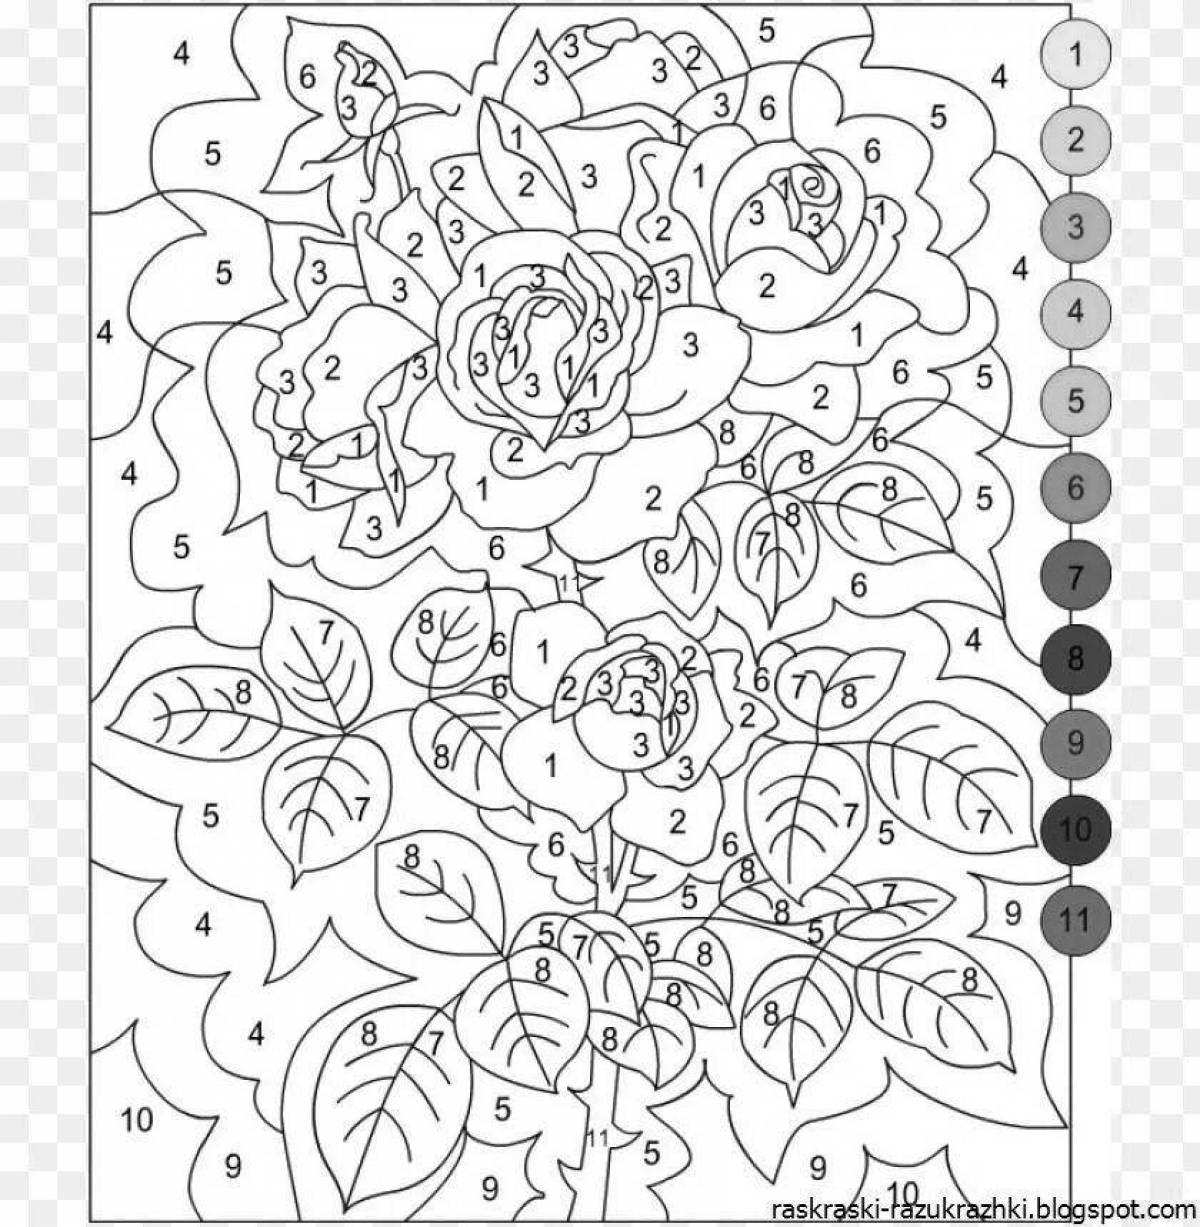 Fun coloring by phone numbers without registration on the Internet